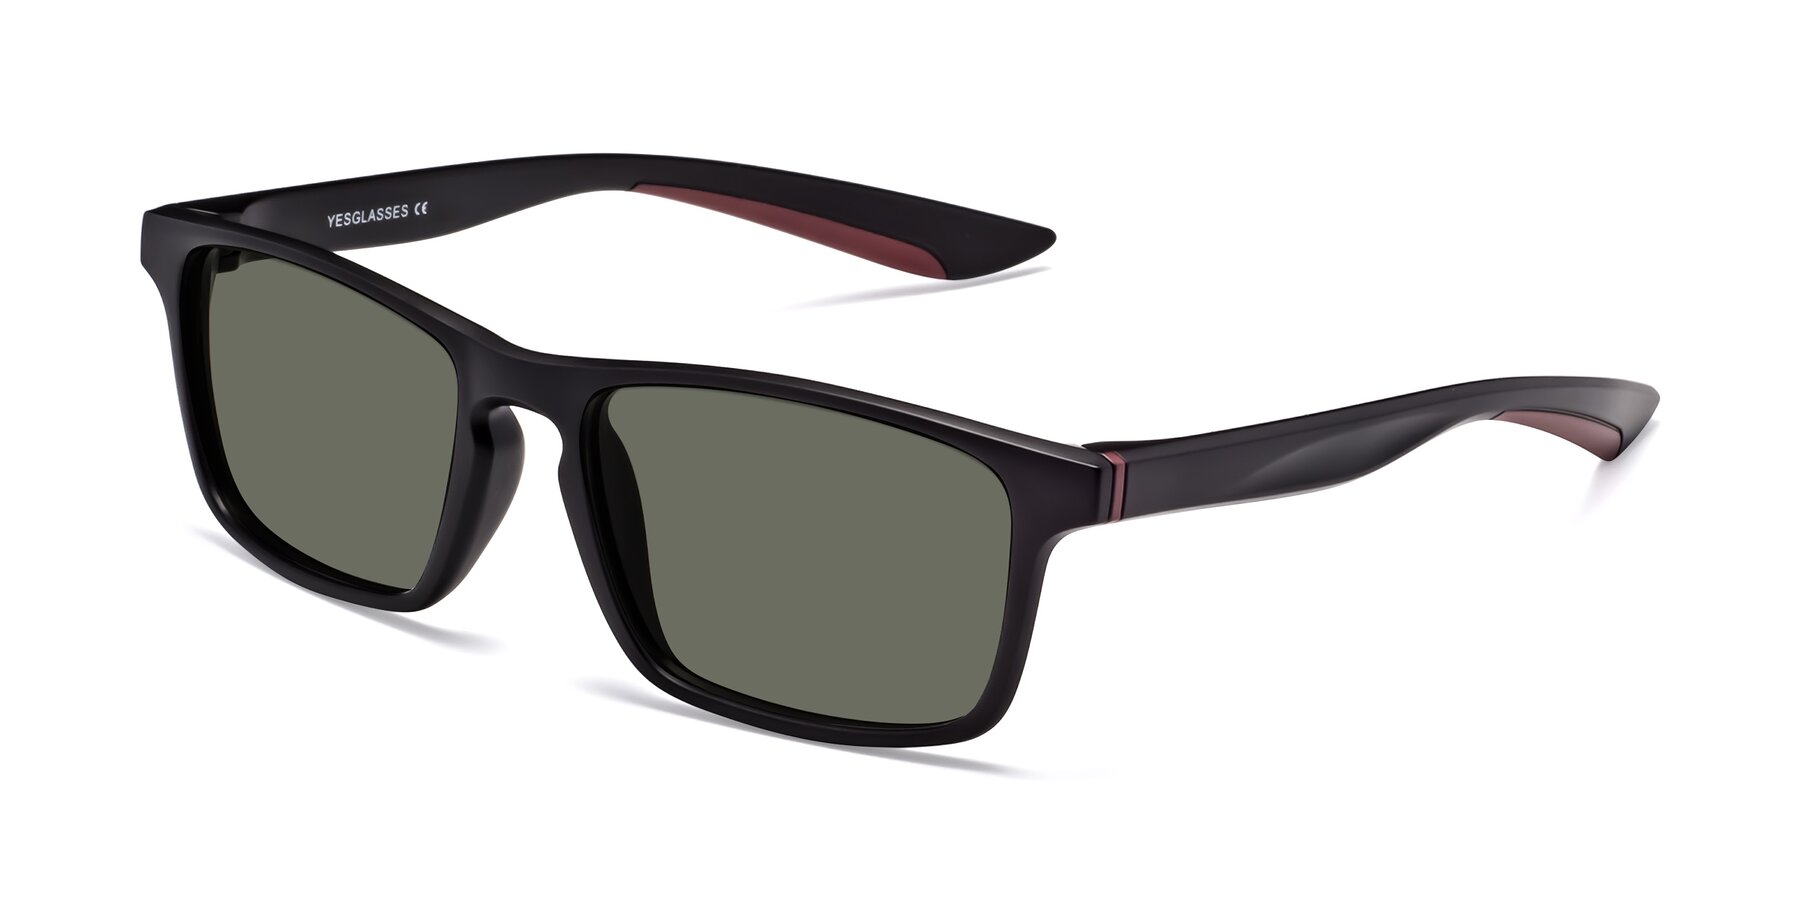 Angle of Passion in Matte Black-Wine with Gray Polarized Lenses